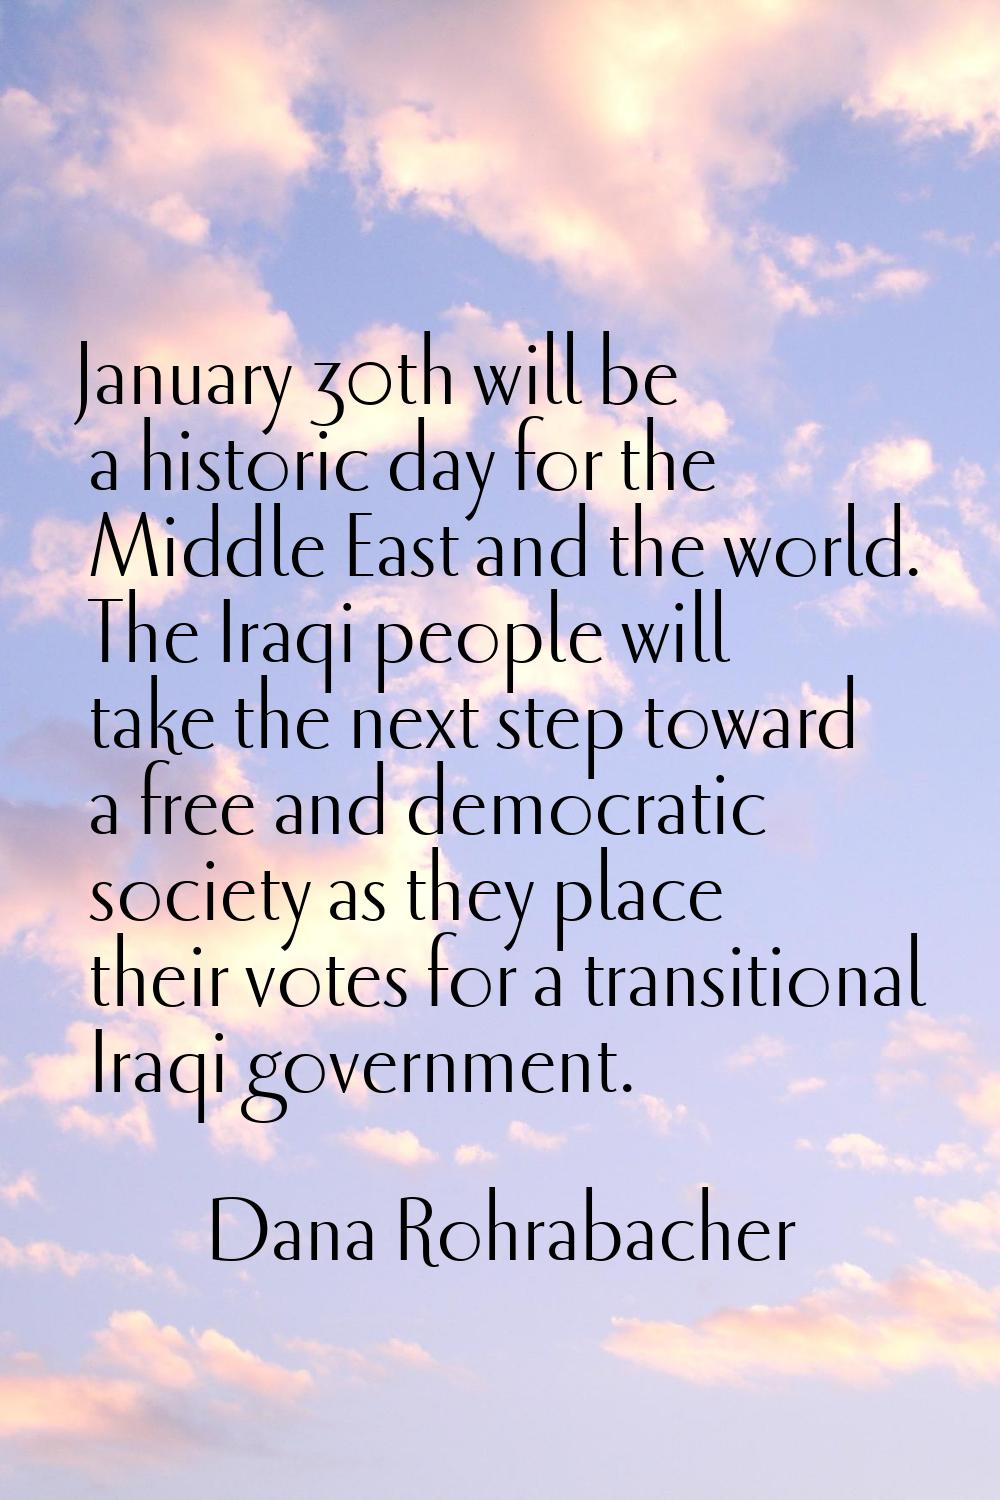 January 30th will be a historic day for the Middle East and the world. The Iraqi people will take t